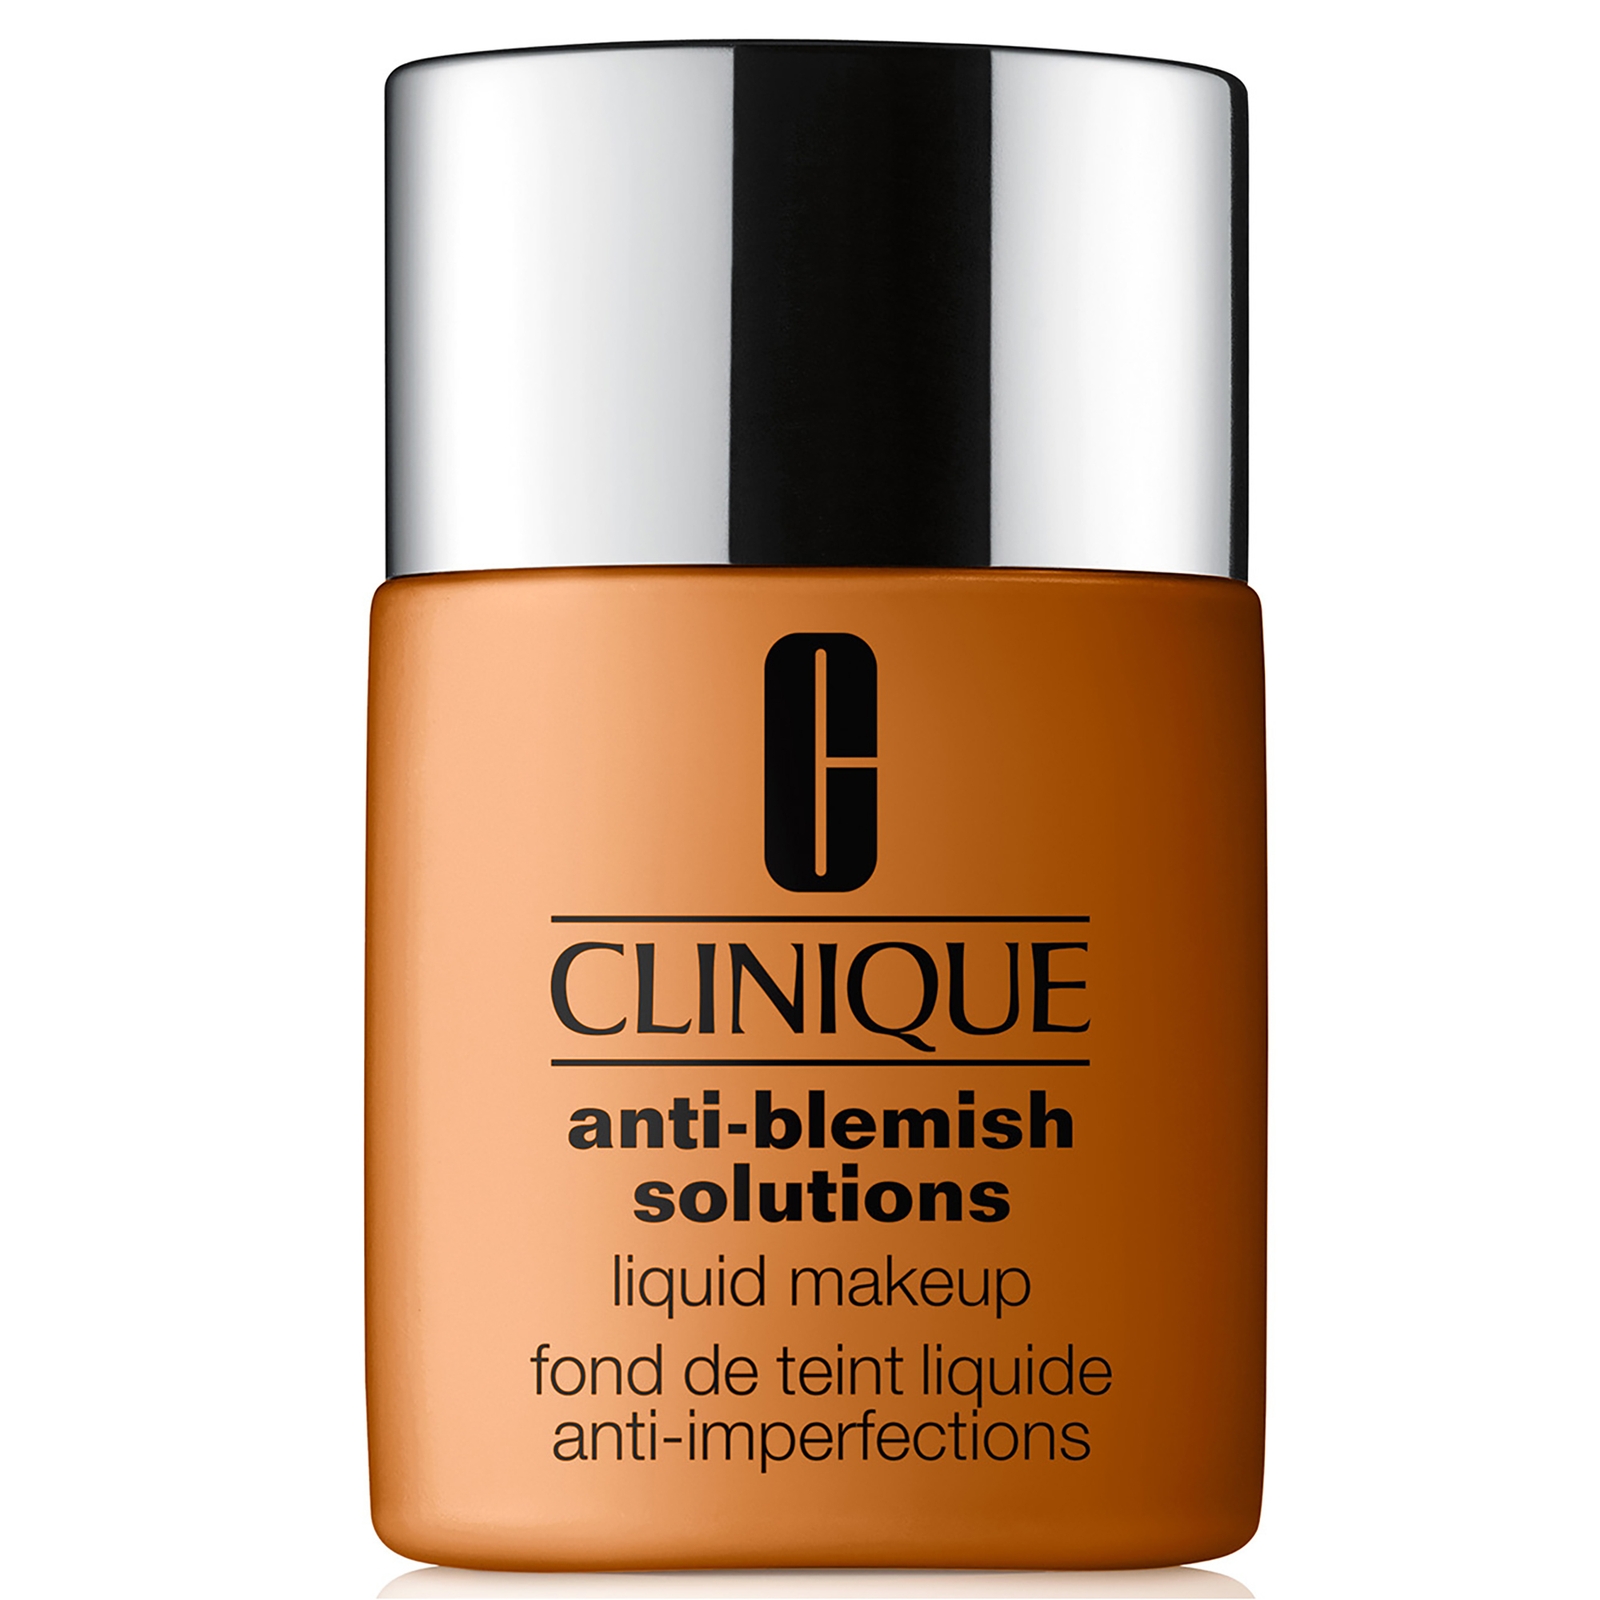 Clinique Anti-Blemish Solutions Liquid Makeup with Salicylic Acid 30ml (Various Shades) - WN 112 Gin